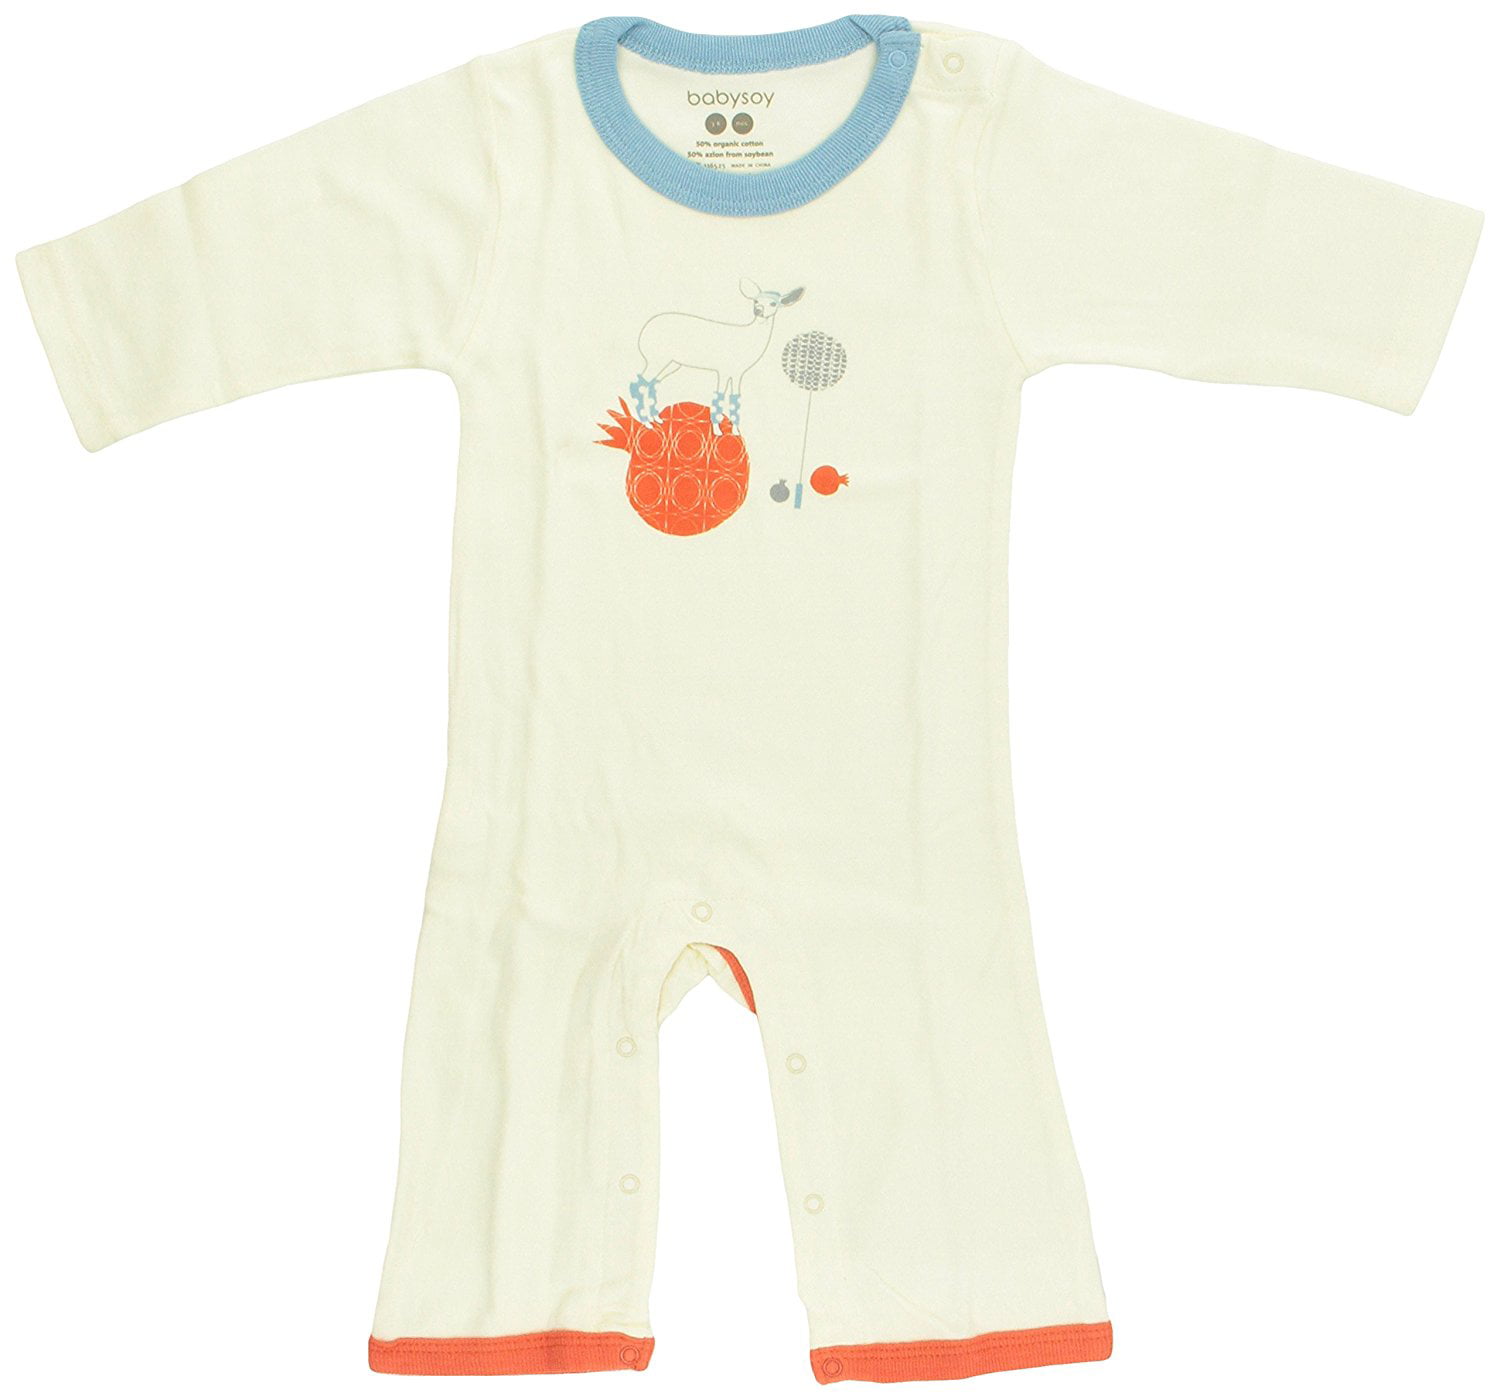 Baby Soy Illustrated Organic Onepiece Romper